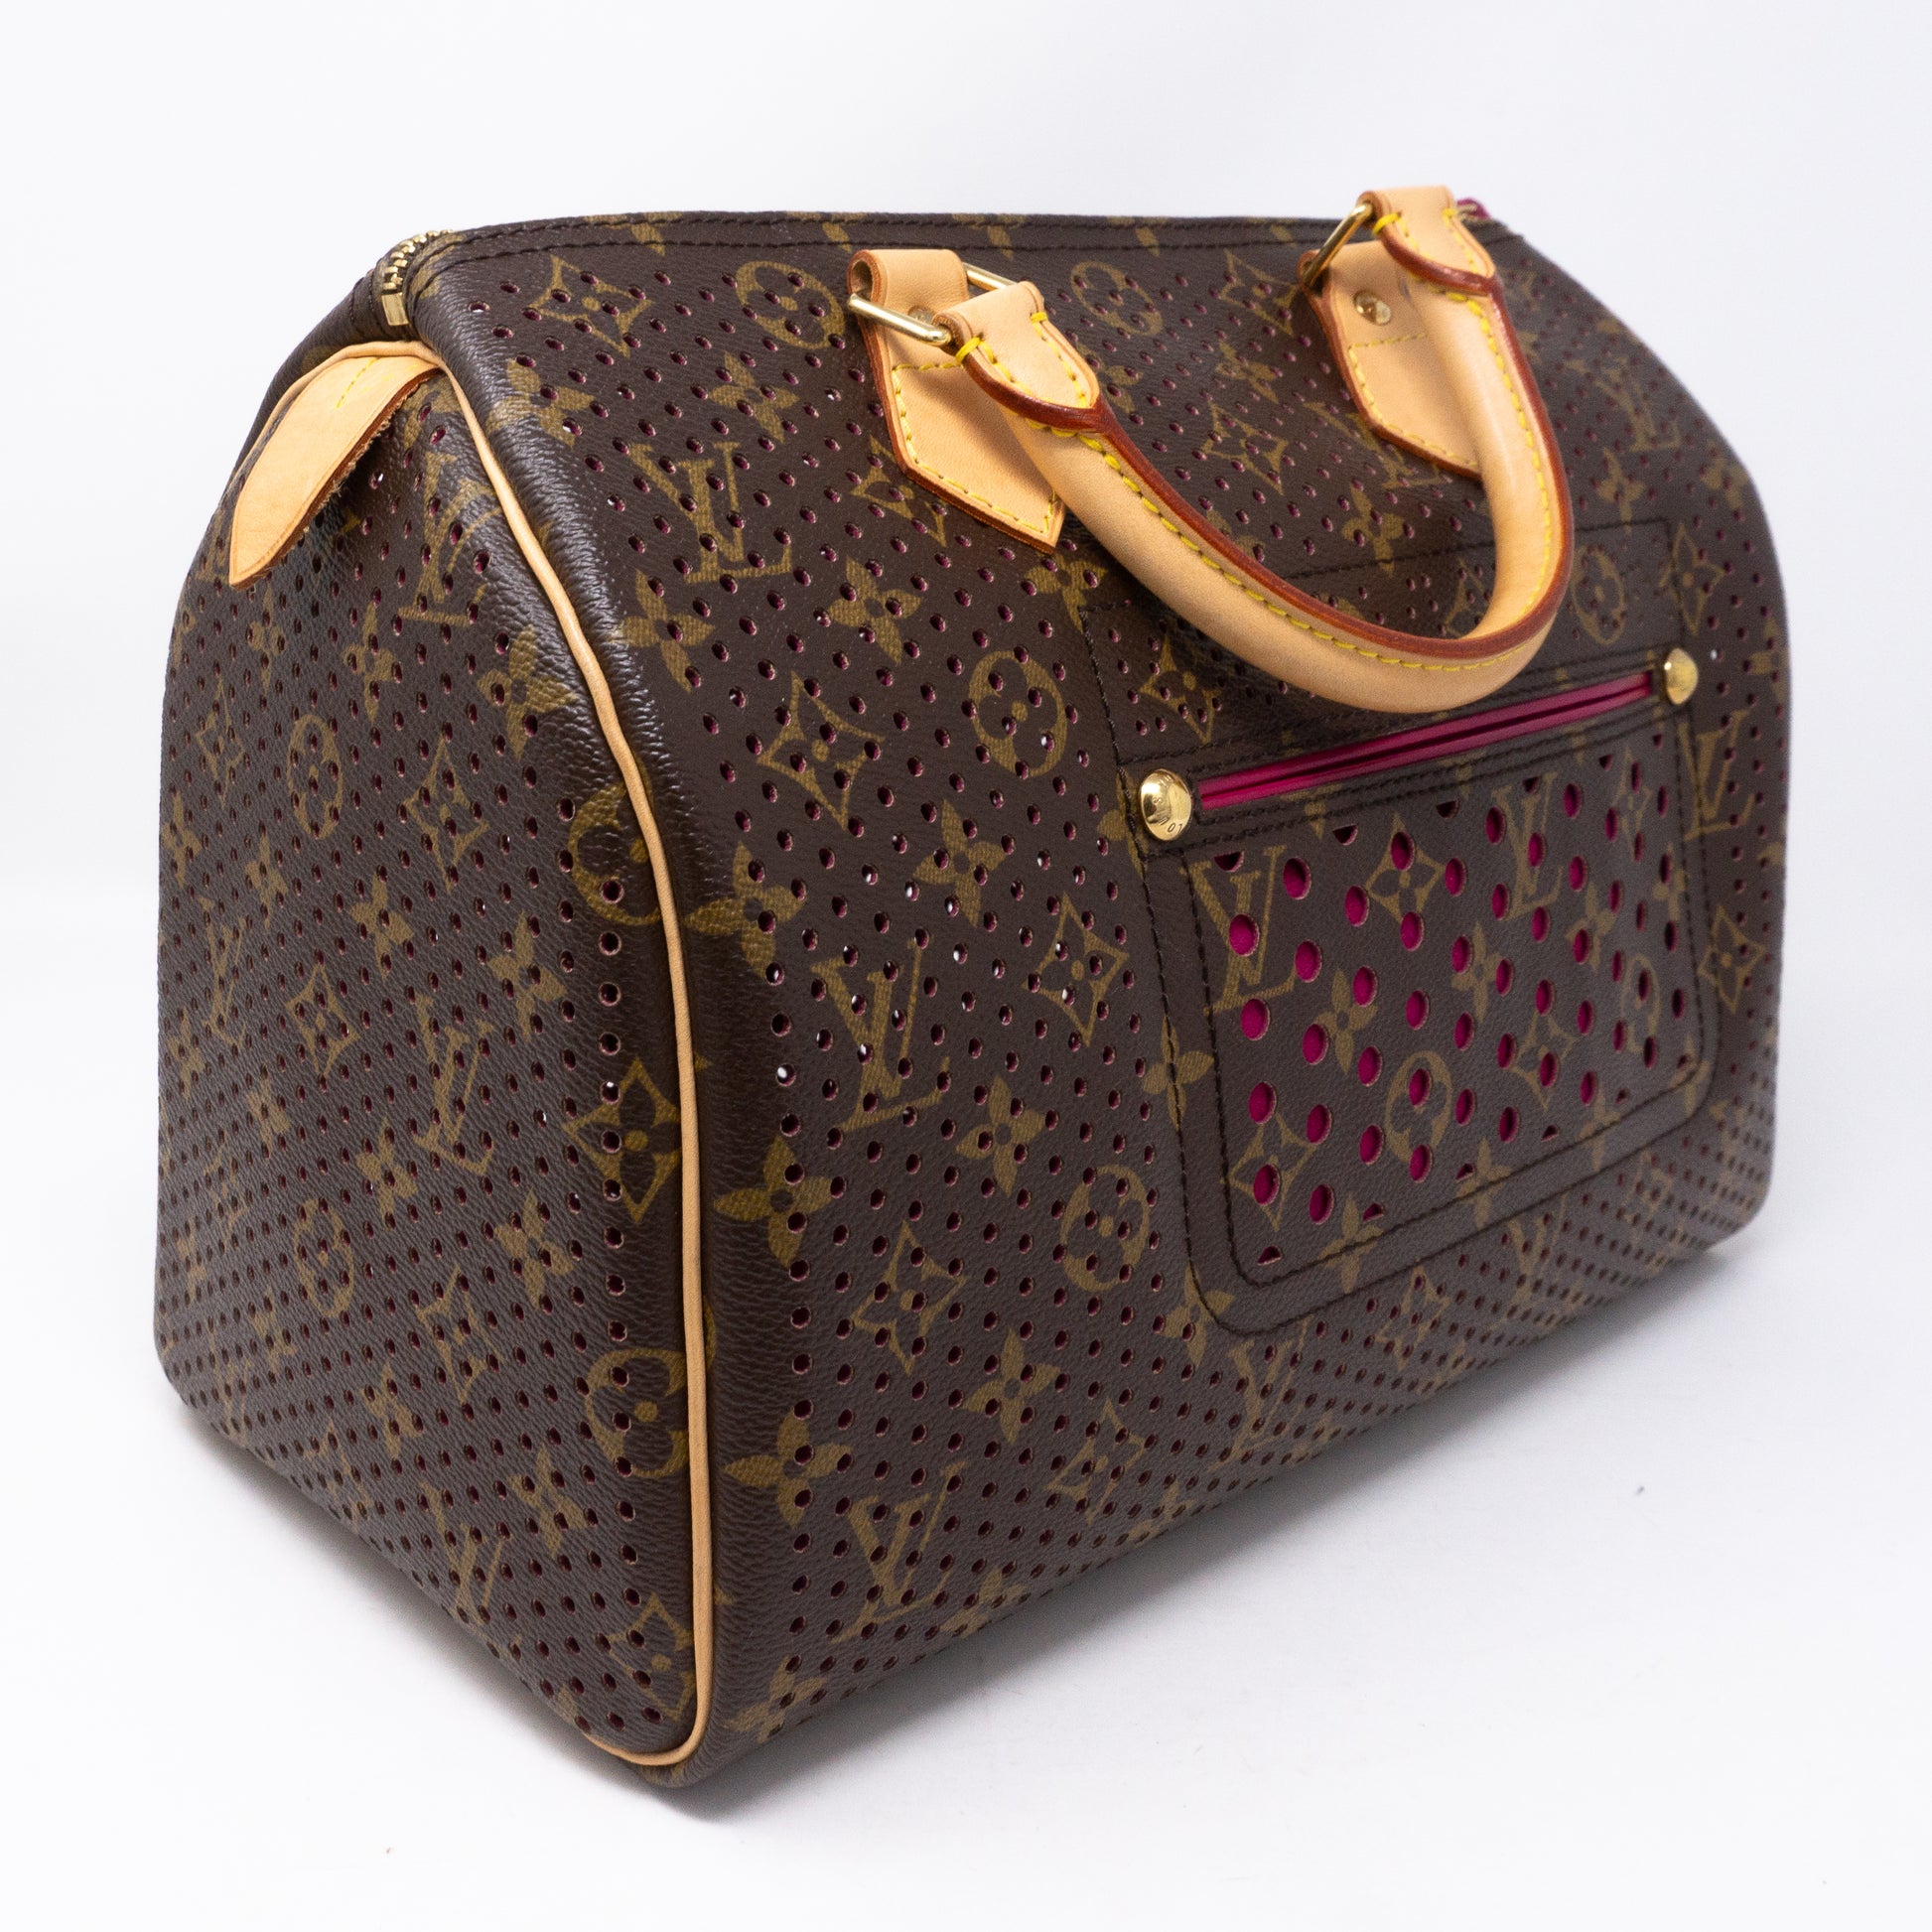 SOLD‼️Louis Vuitton Perforated Speedy 30